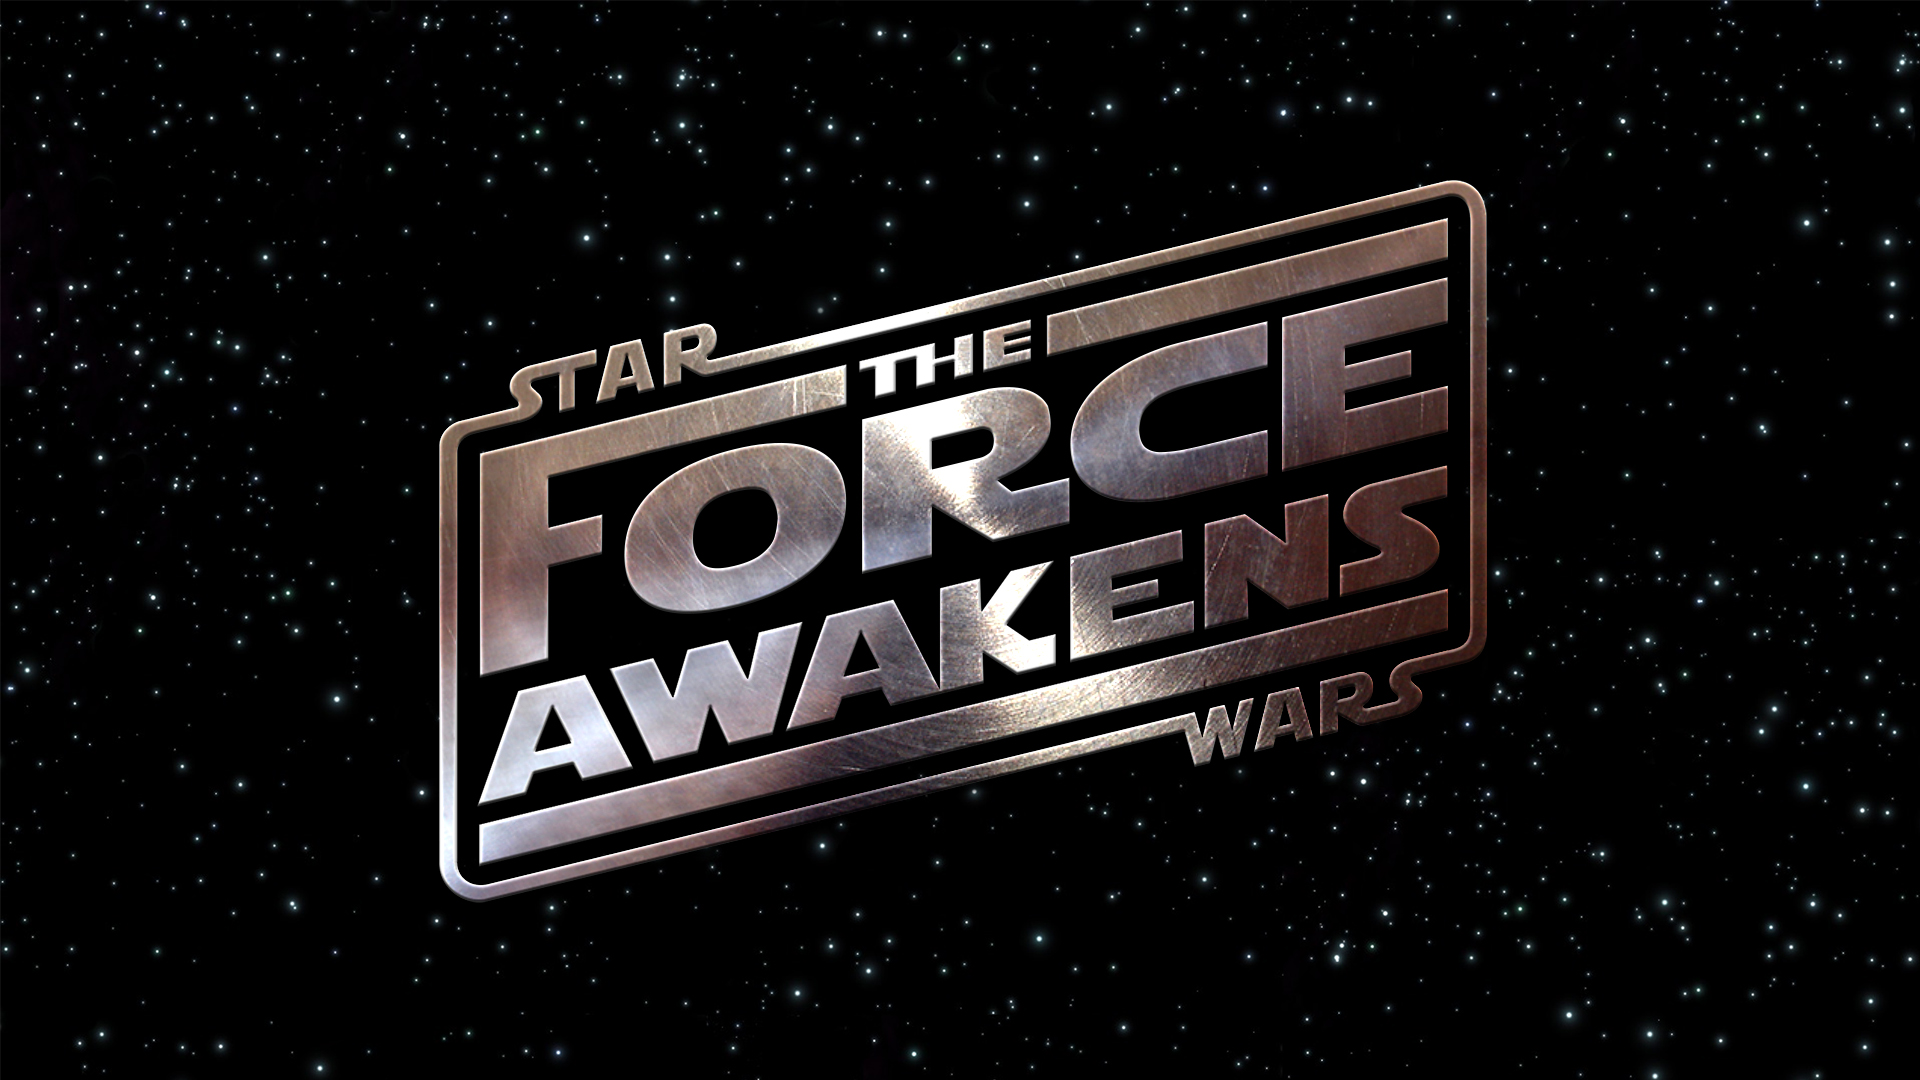 Panoramic Wallpapers Star Wars Episode Vii: The Force Awakens 